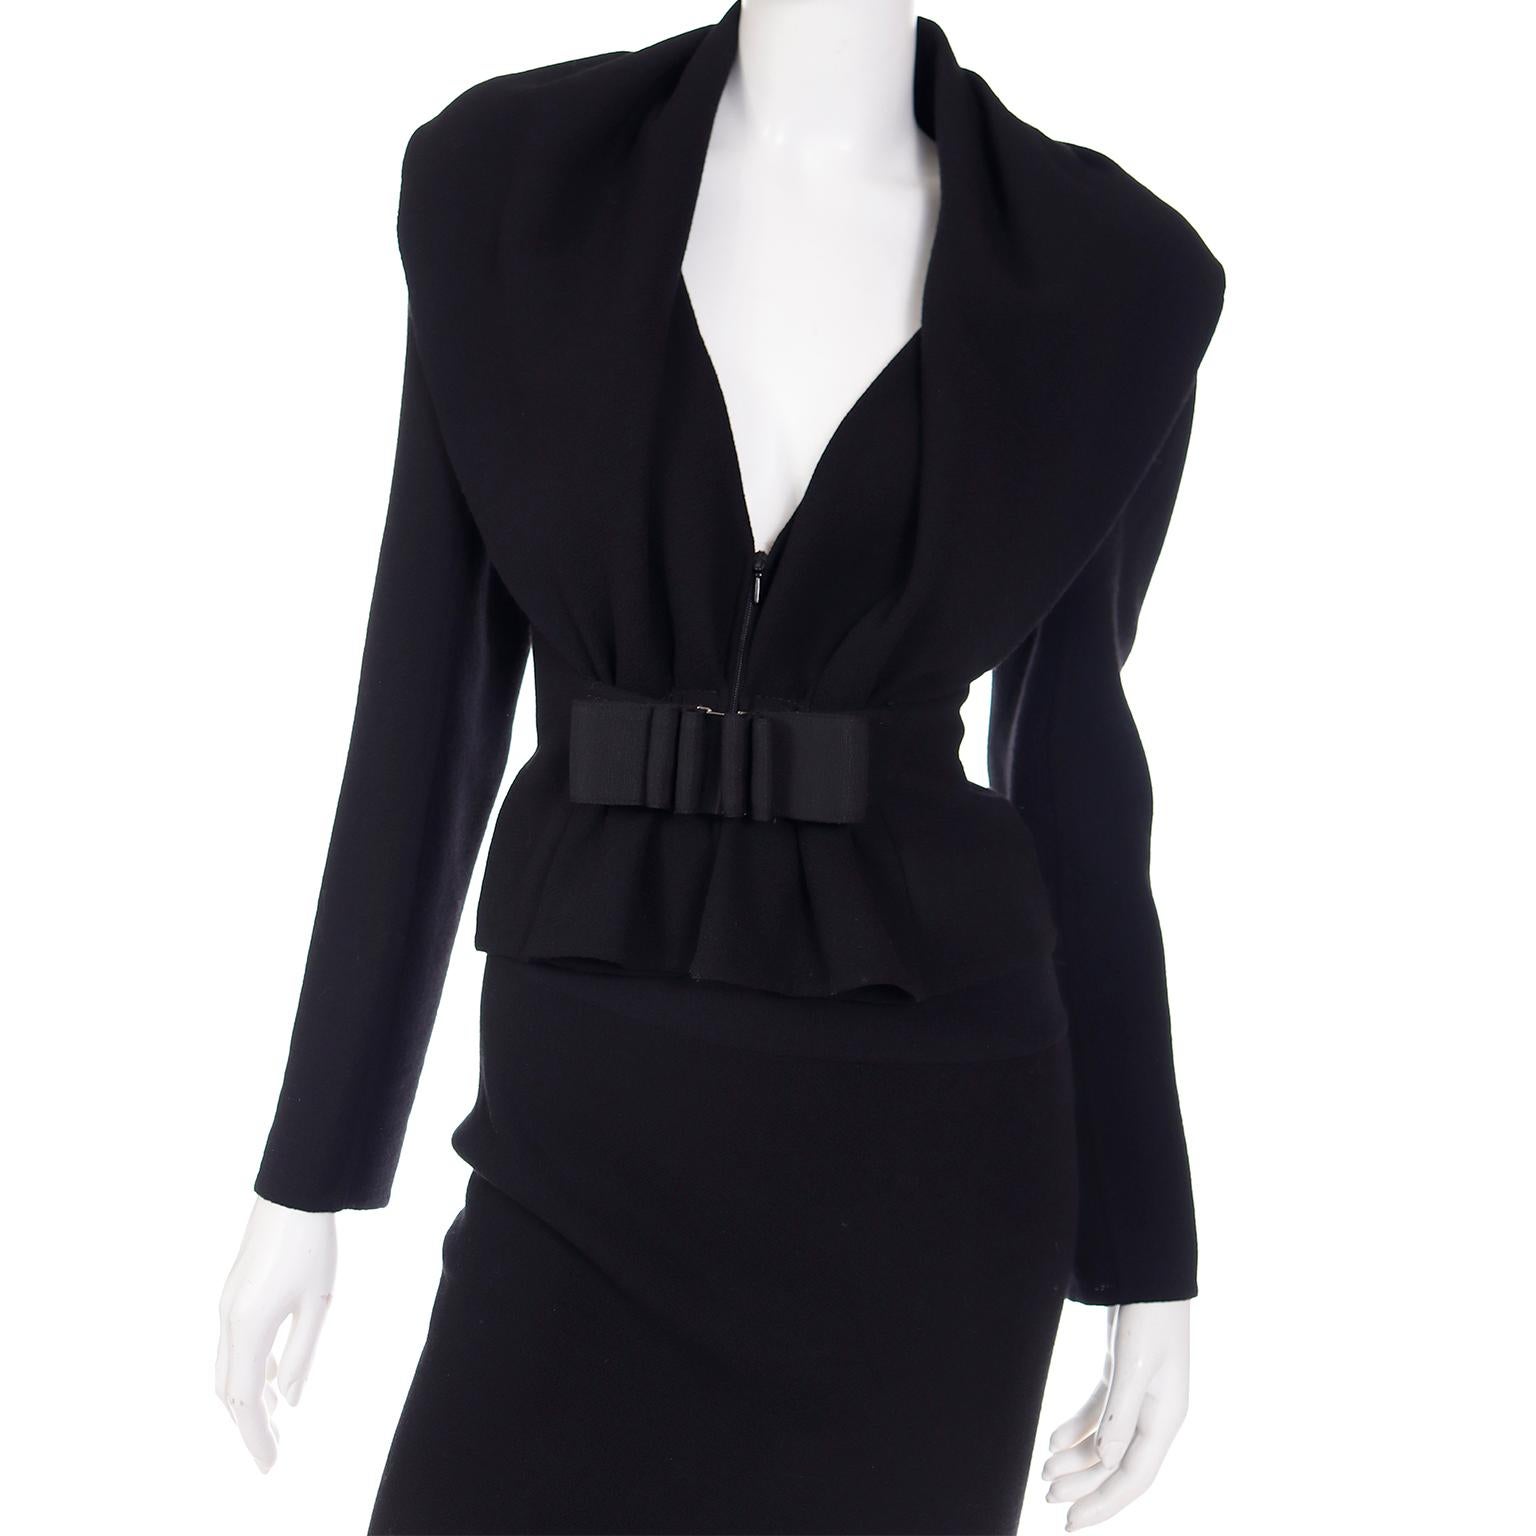 Valentino Black Skirt Suit With Unique Jacket With Bow & Buckle For Sale 2